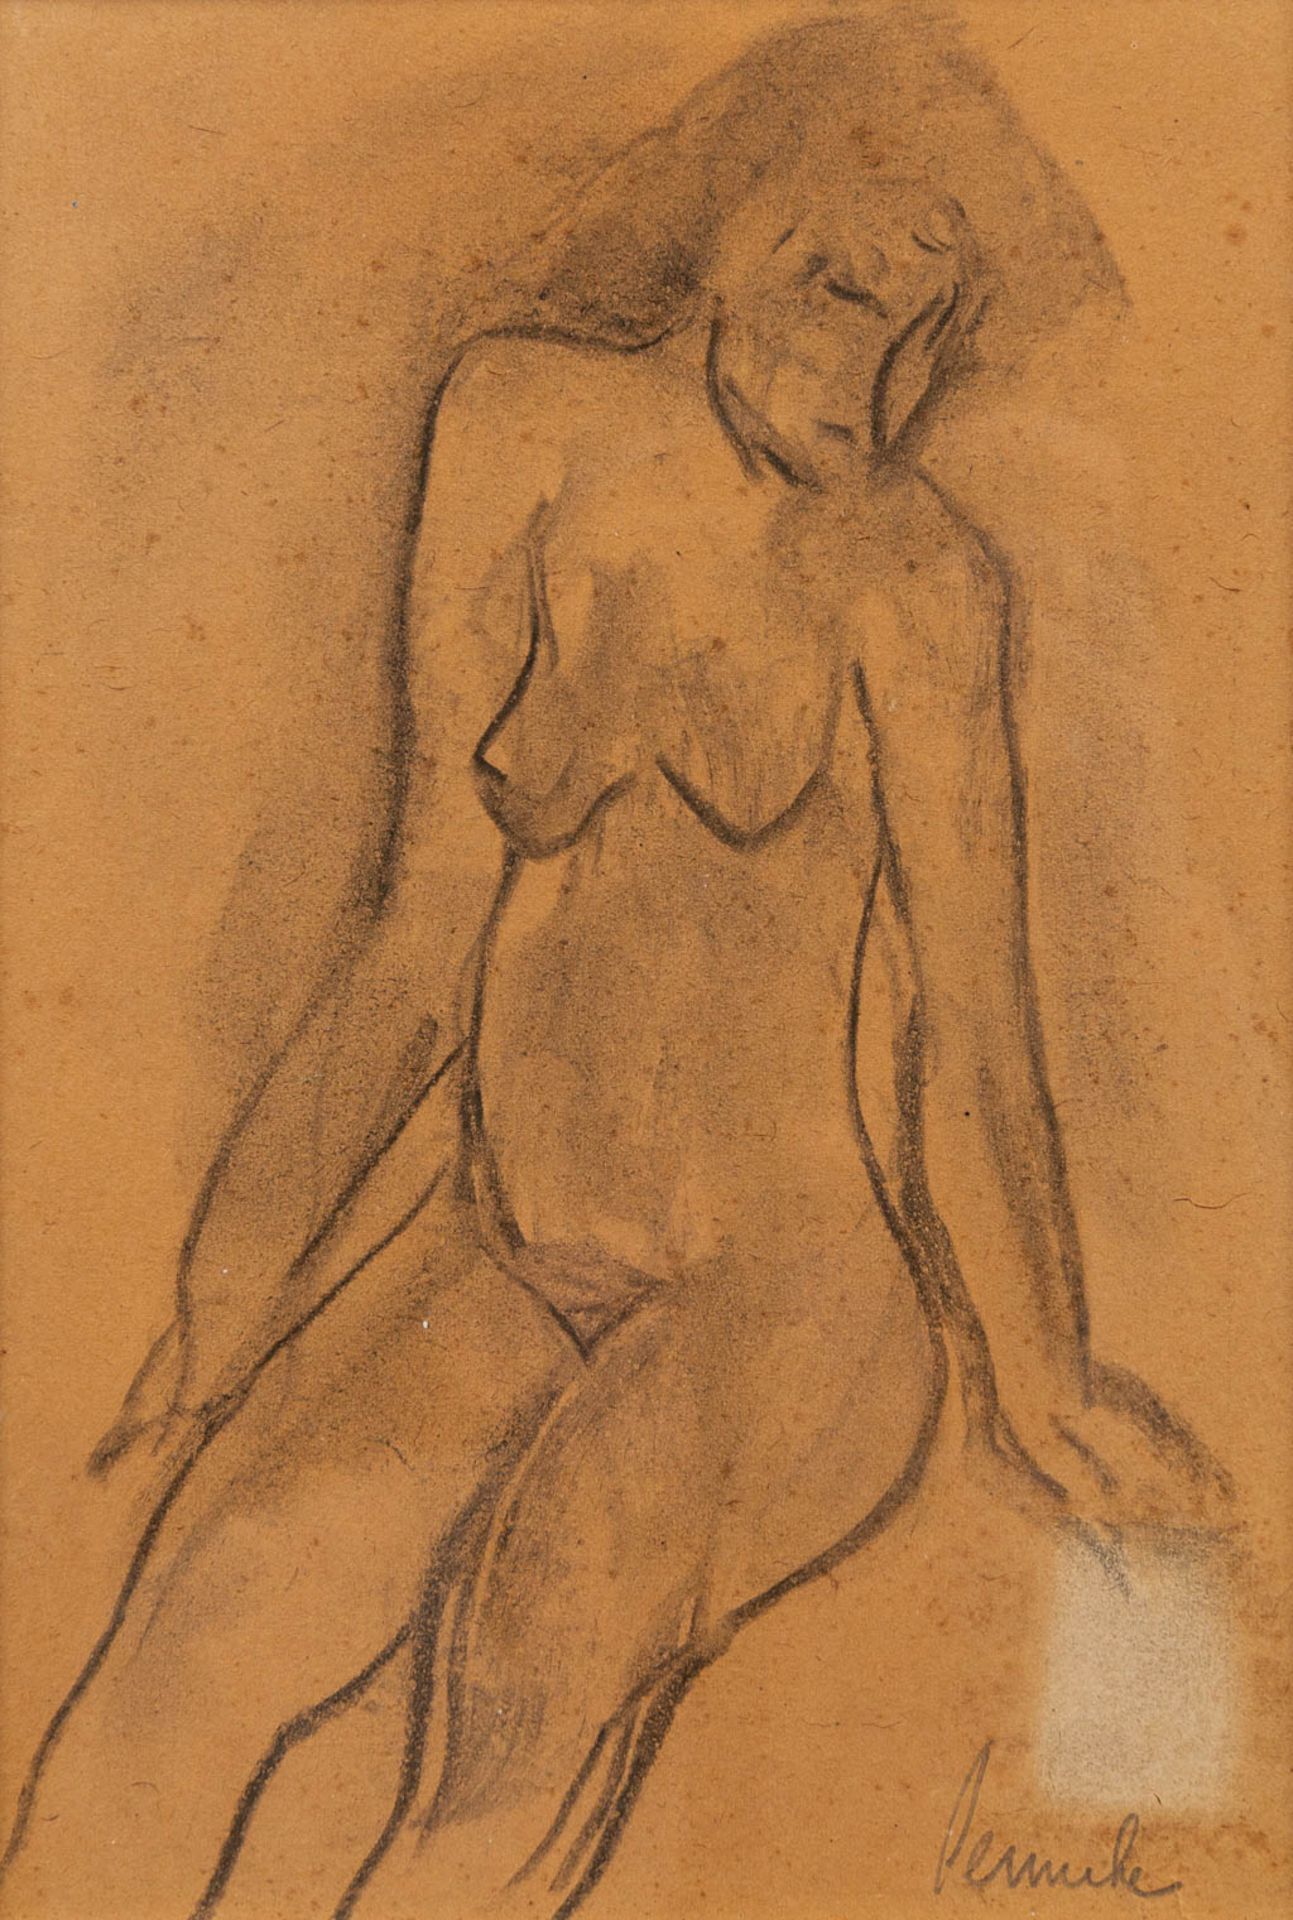 Constant PERMEKE (1886-1952) 'sitting naked' a drawing, pencil on paper. (17 x 25 cm)